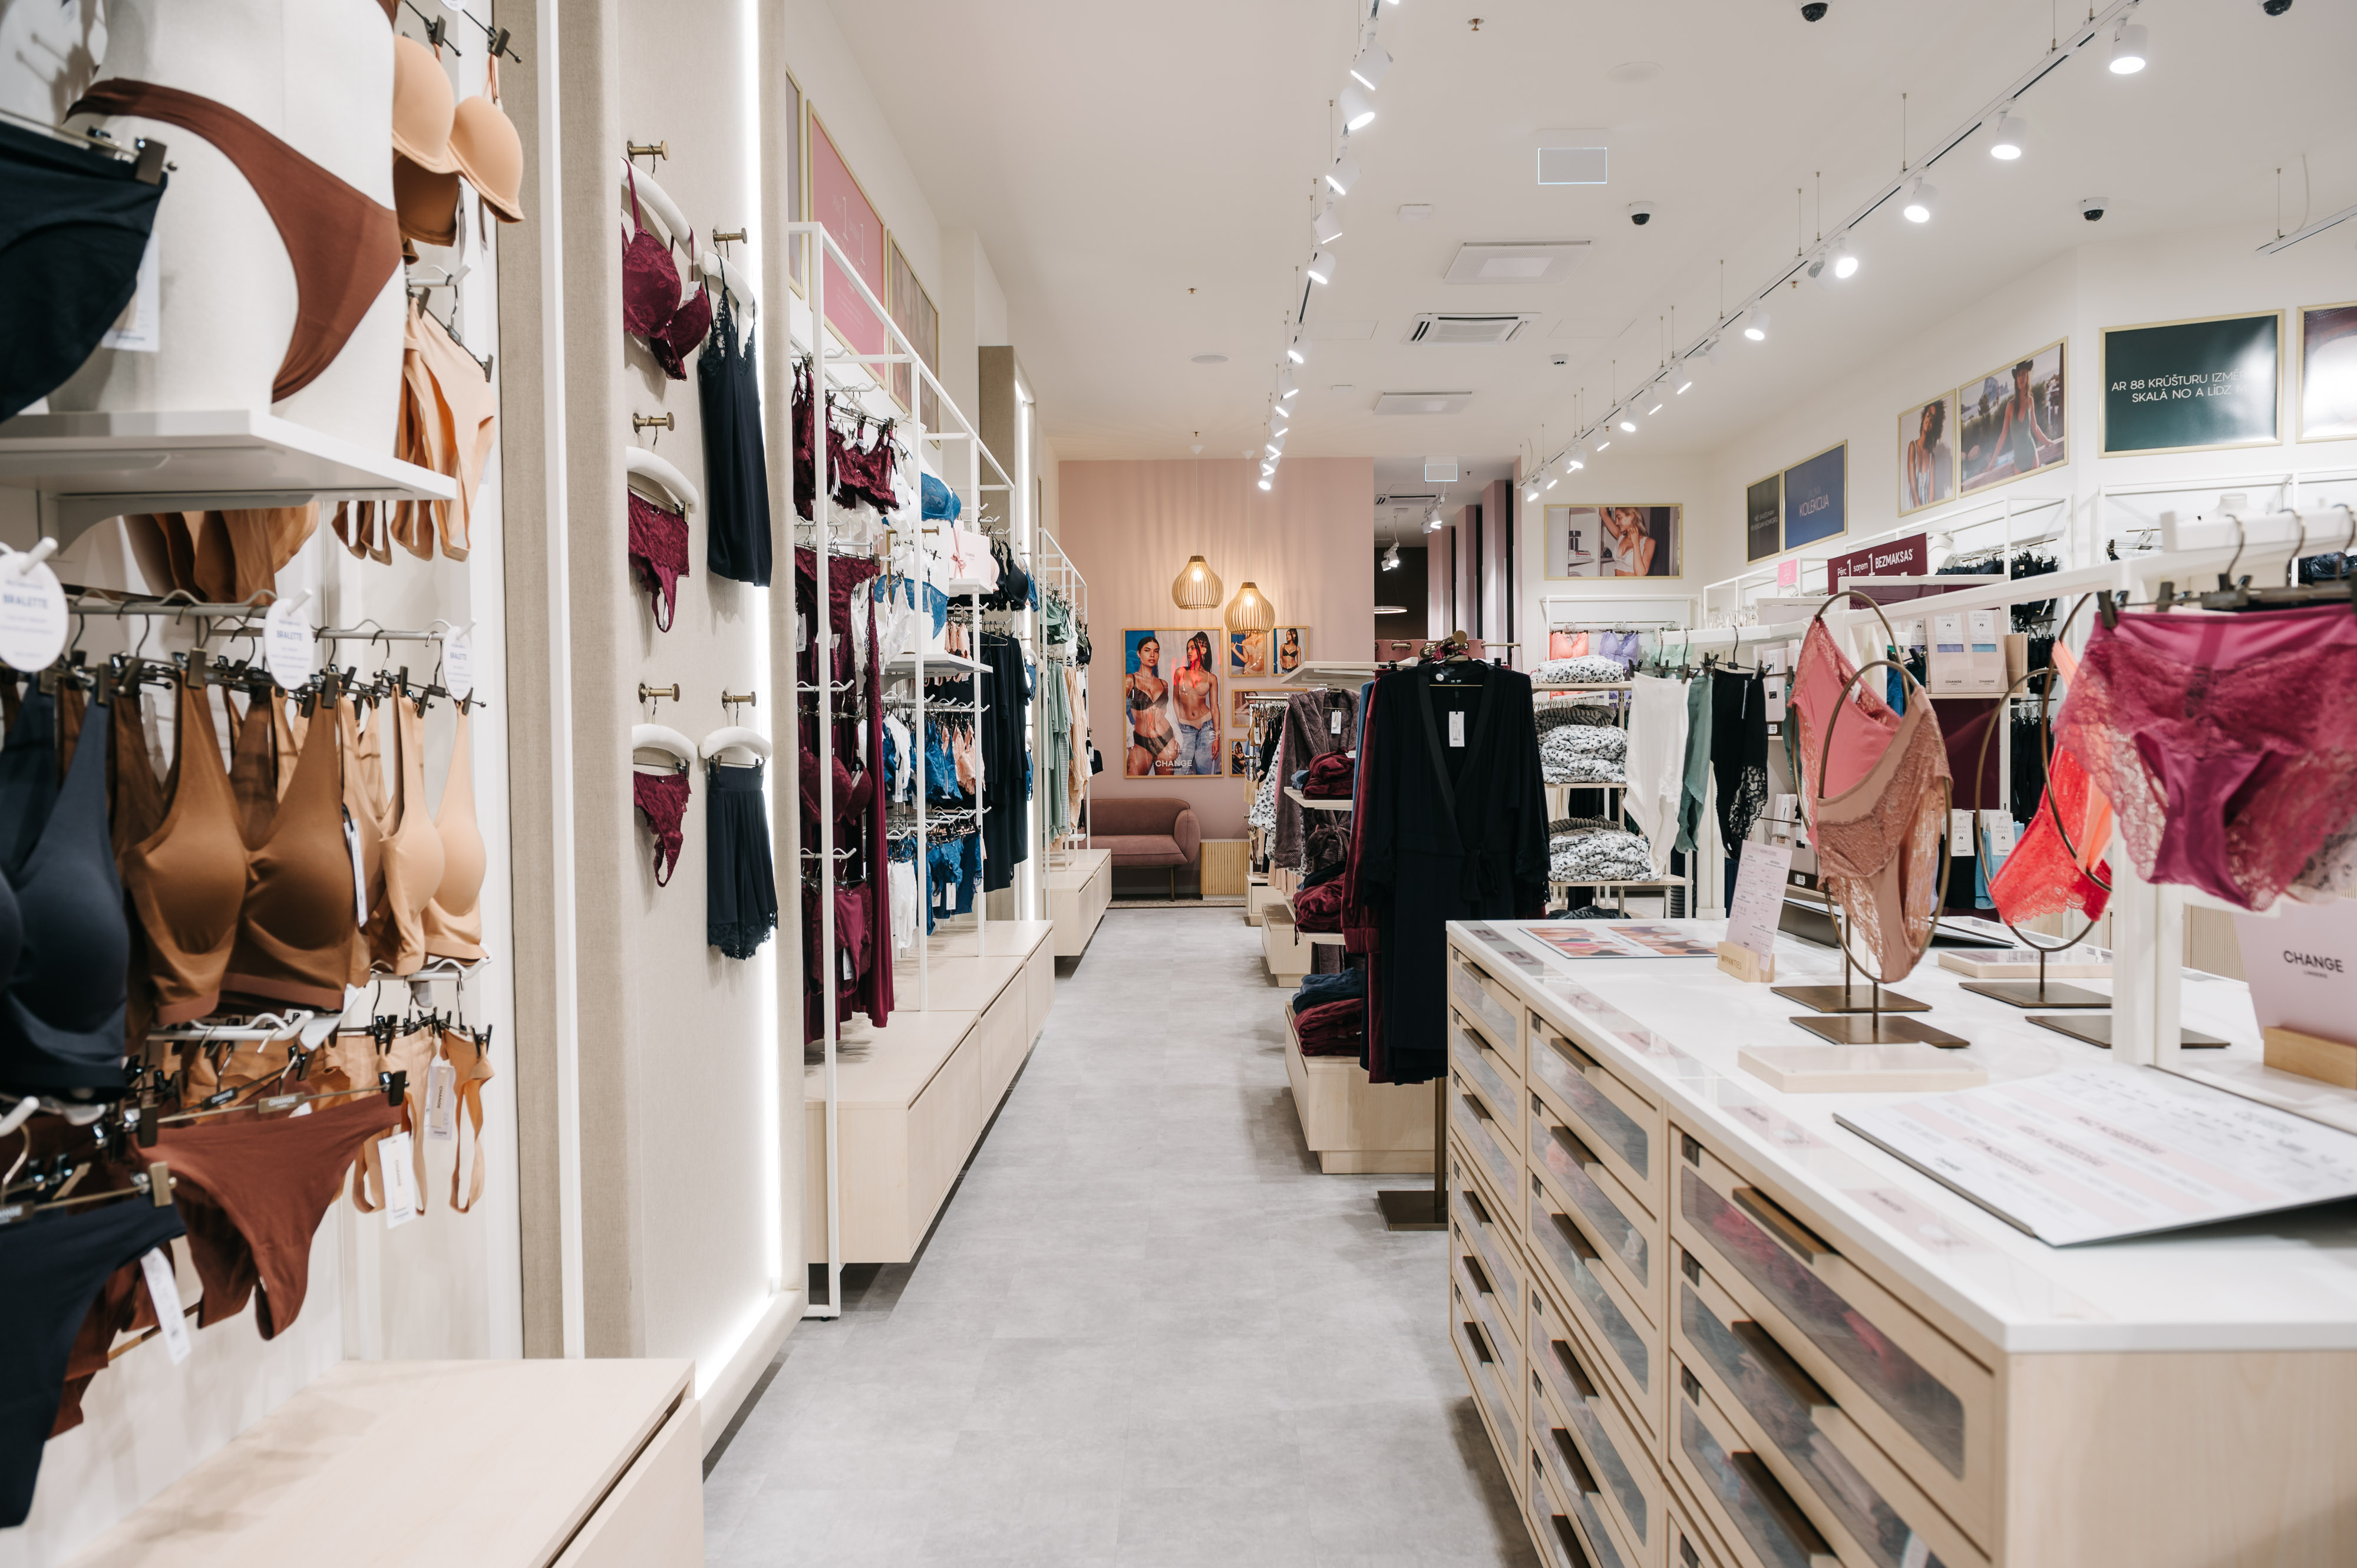 Shopping center Spice opens the first newest concept “CHANGE Lingerie”  store in the Baltics